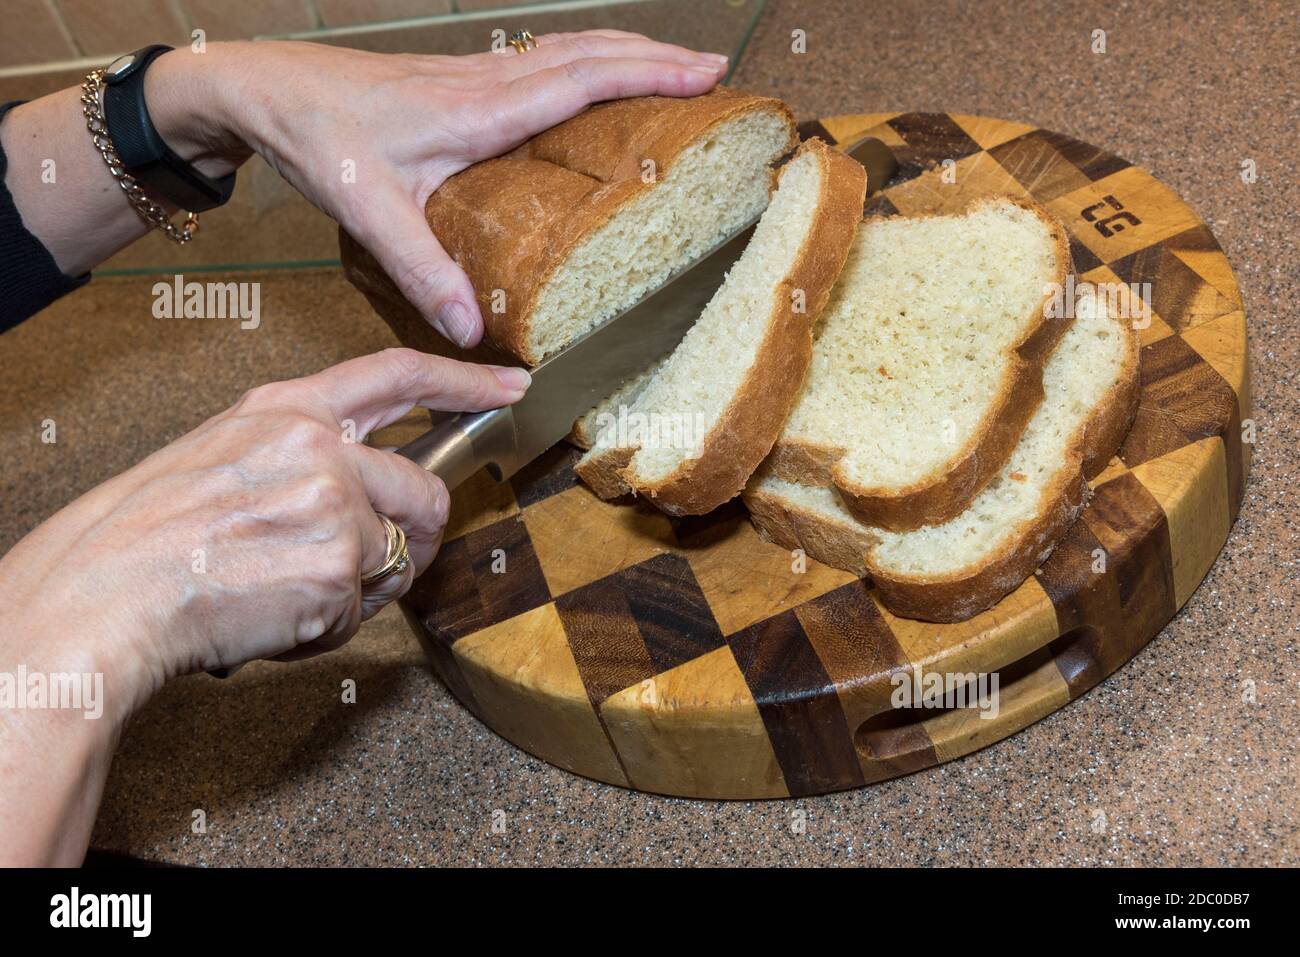 Hands slicing a white loaf of bread. Home baked. Stock Photo